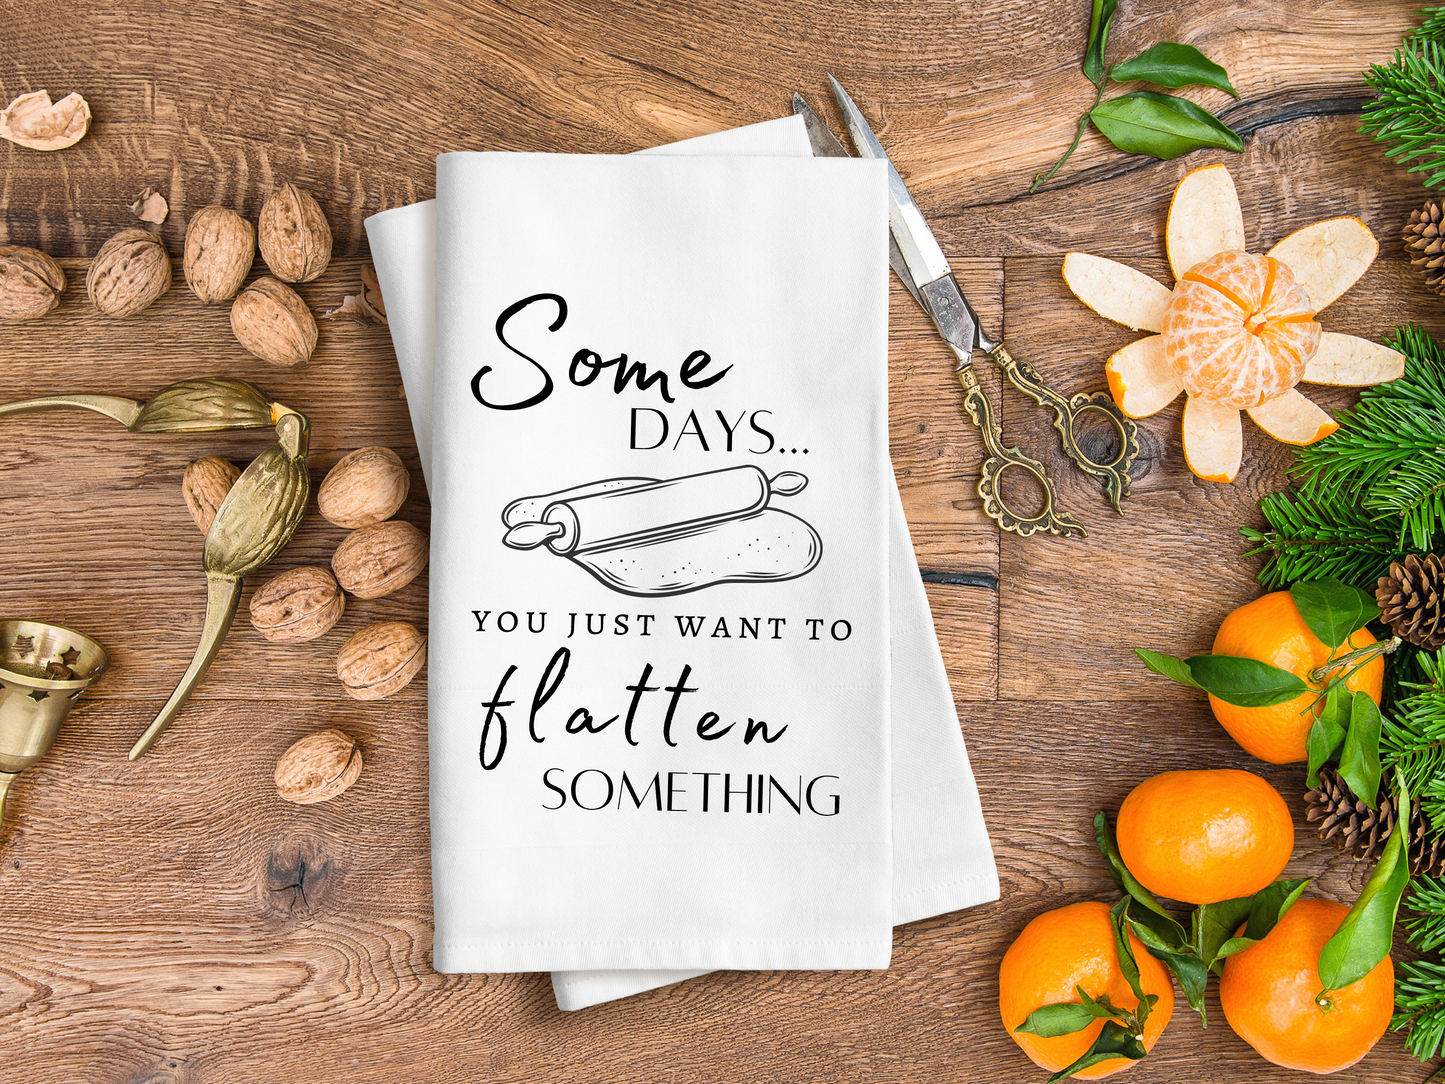 100% Cotton Tea Towel ∣ 28"x28" ∣ Funny Rolling Pin Design ∣ Add Comedy to Your Kitchen!